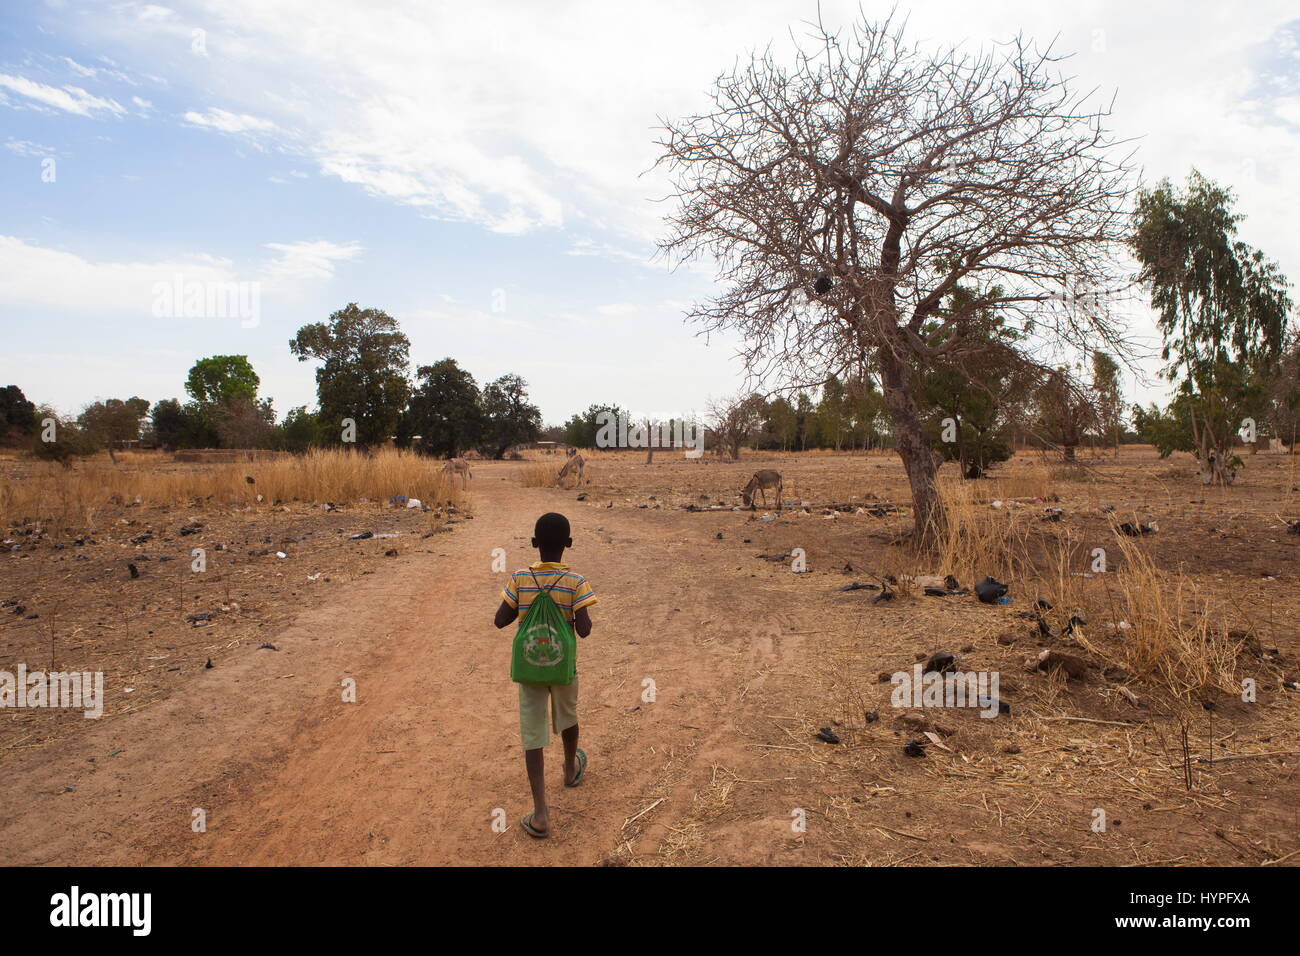 Burkina Faso, 10-year-old child going to the school, the village of Ponsom Tenga is located 20 kilometers from Ouagadougou Stock Photo